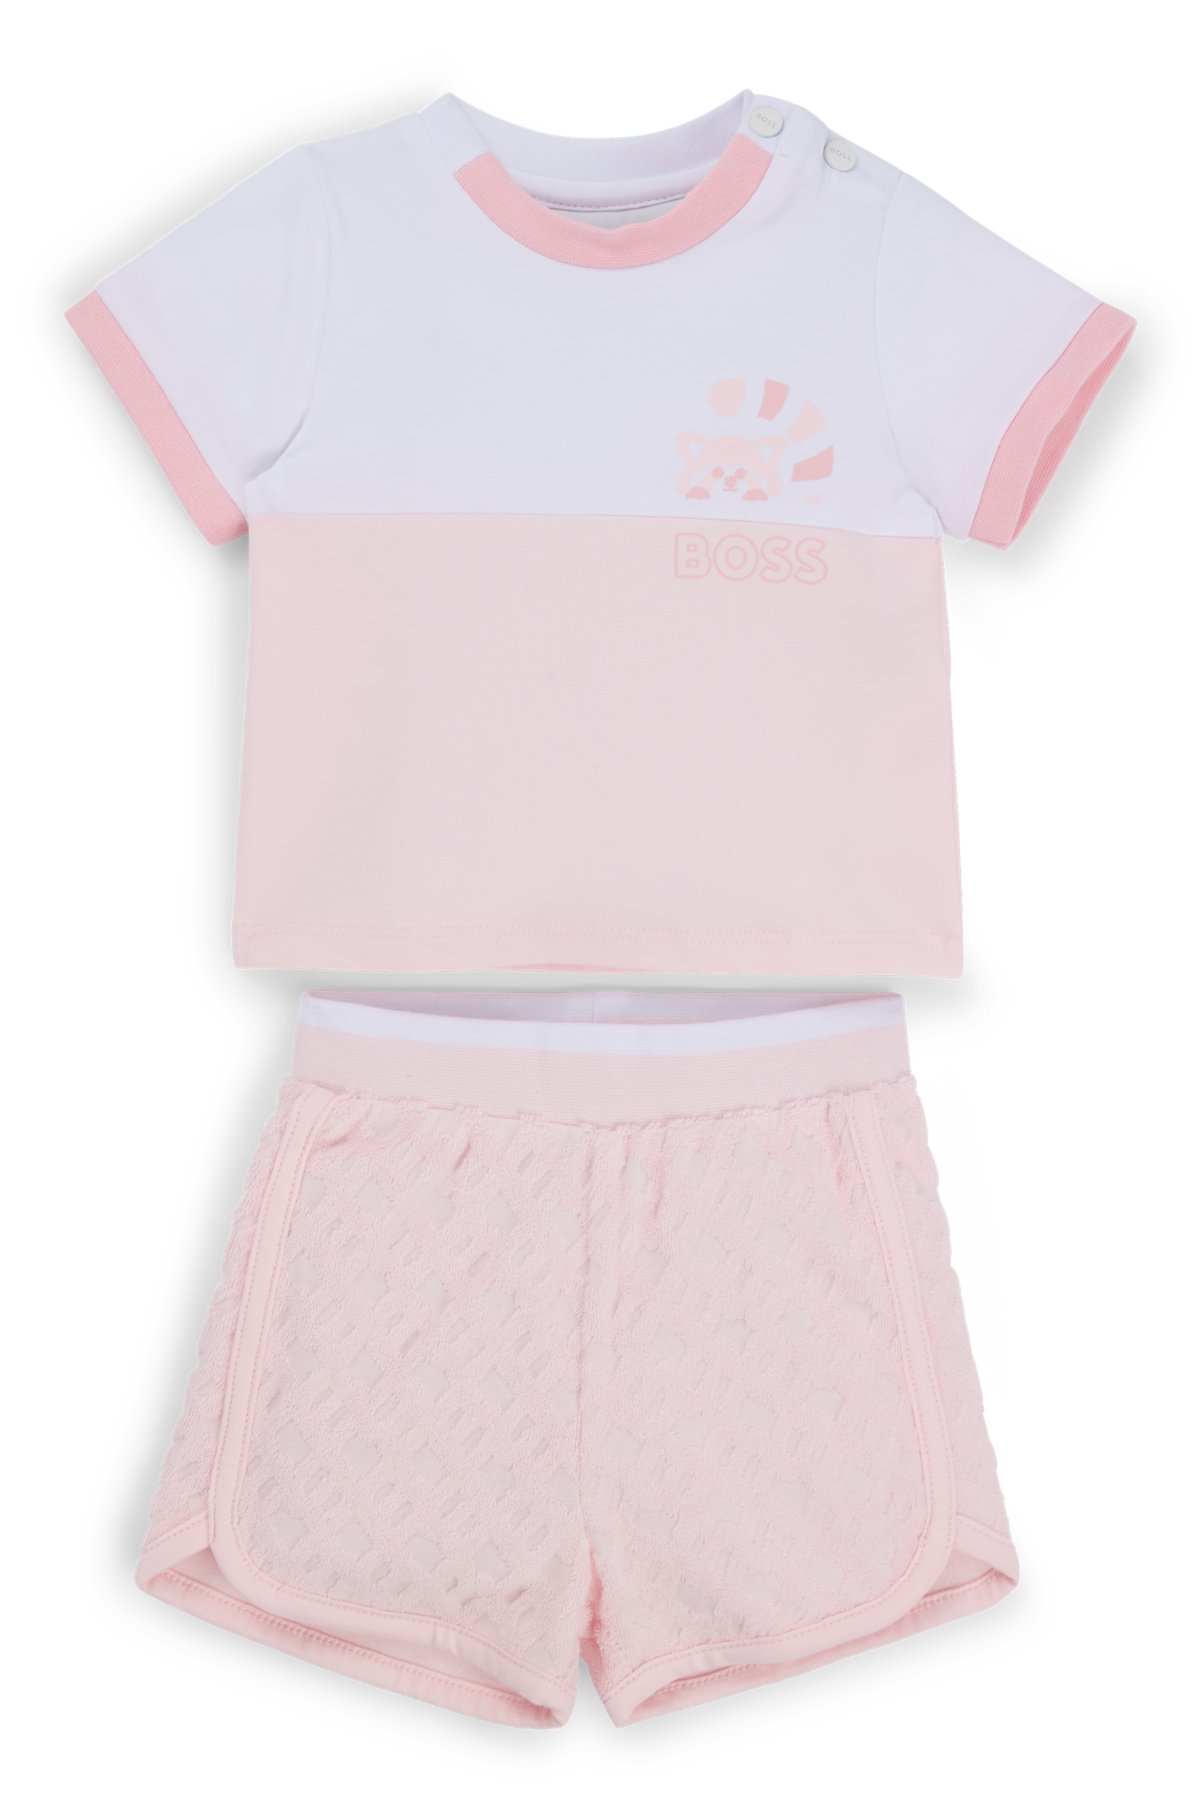 Gift-boxed T-shirt and shorts set for babies, light pink